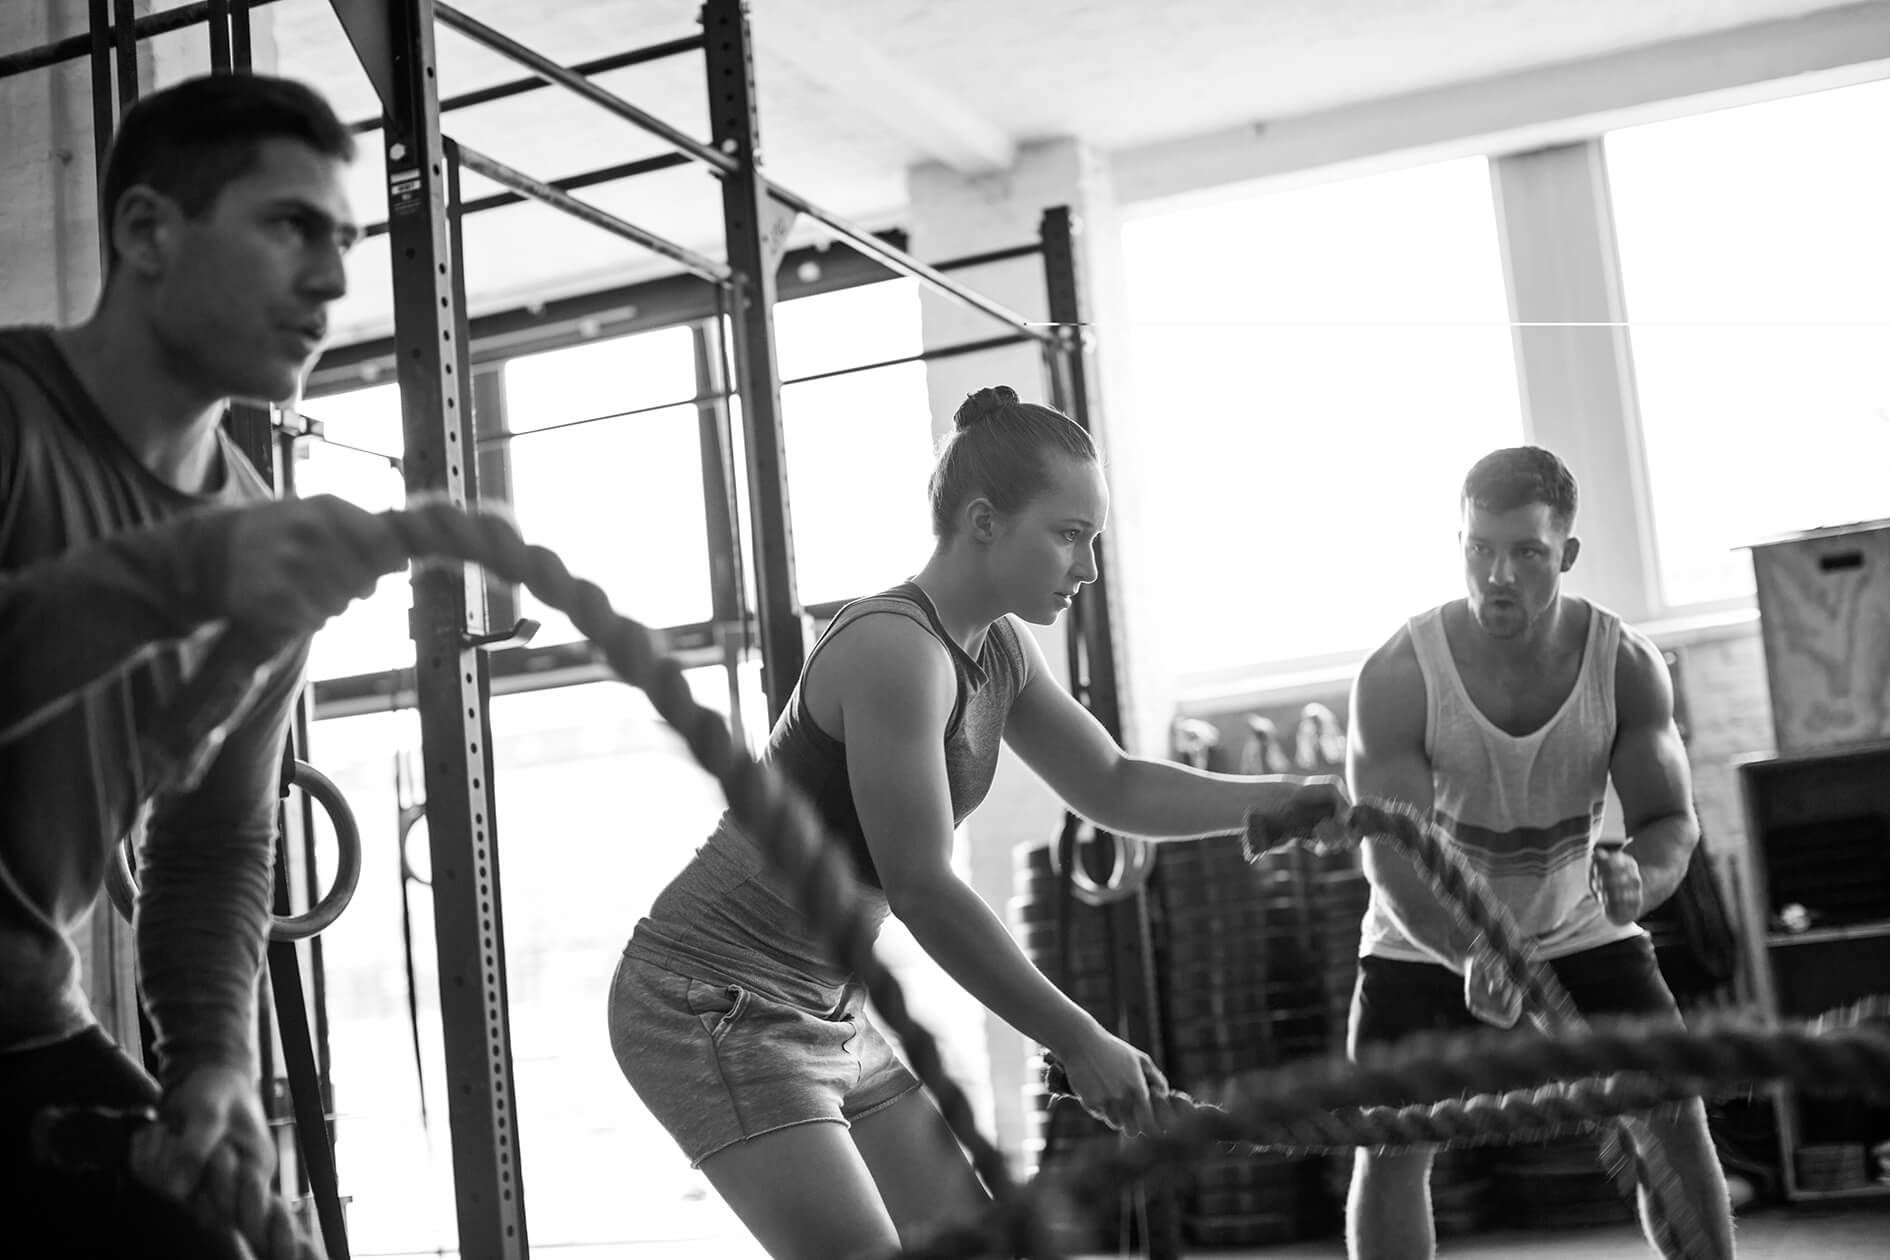 Fitness gym with man and woman working out with battle ropes at the gym